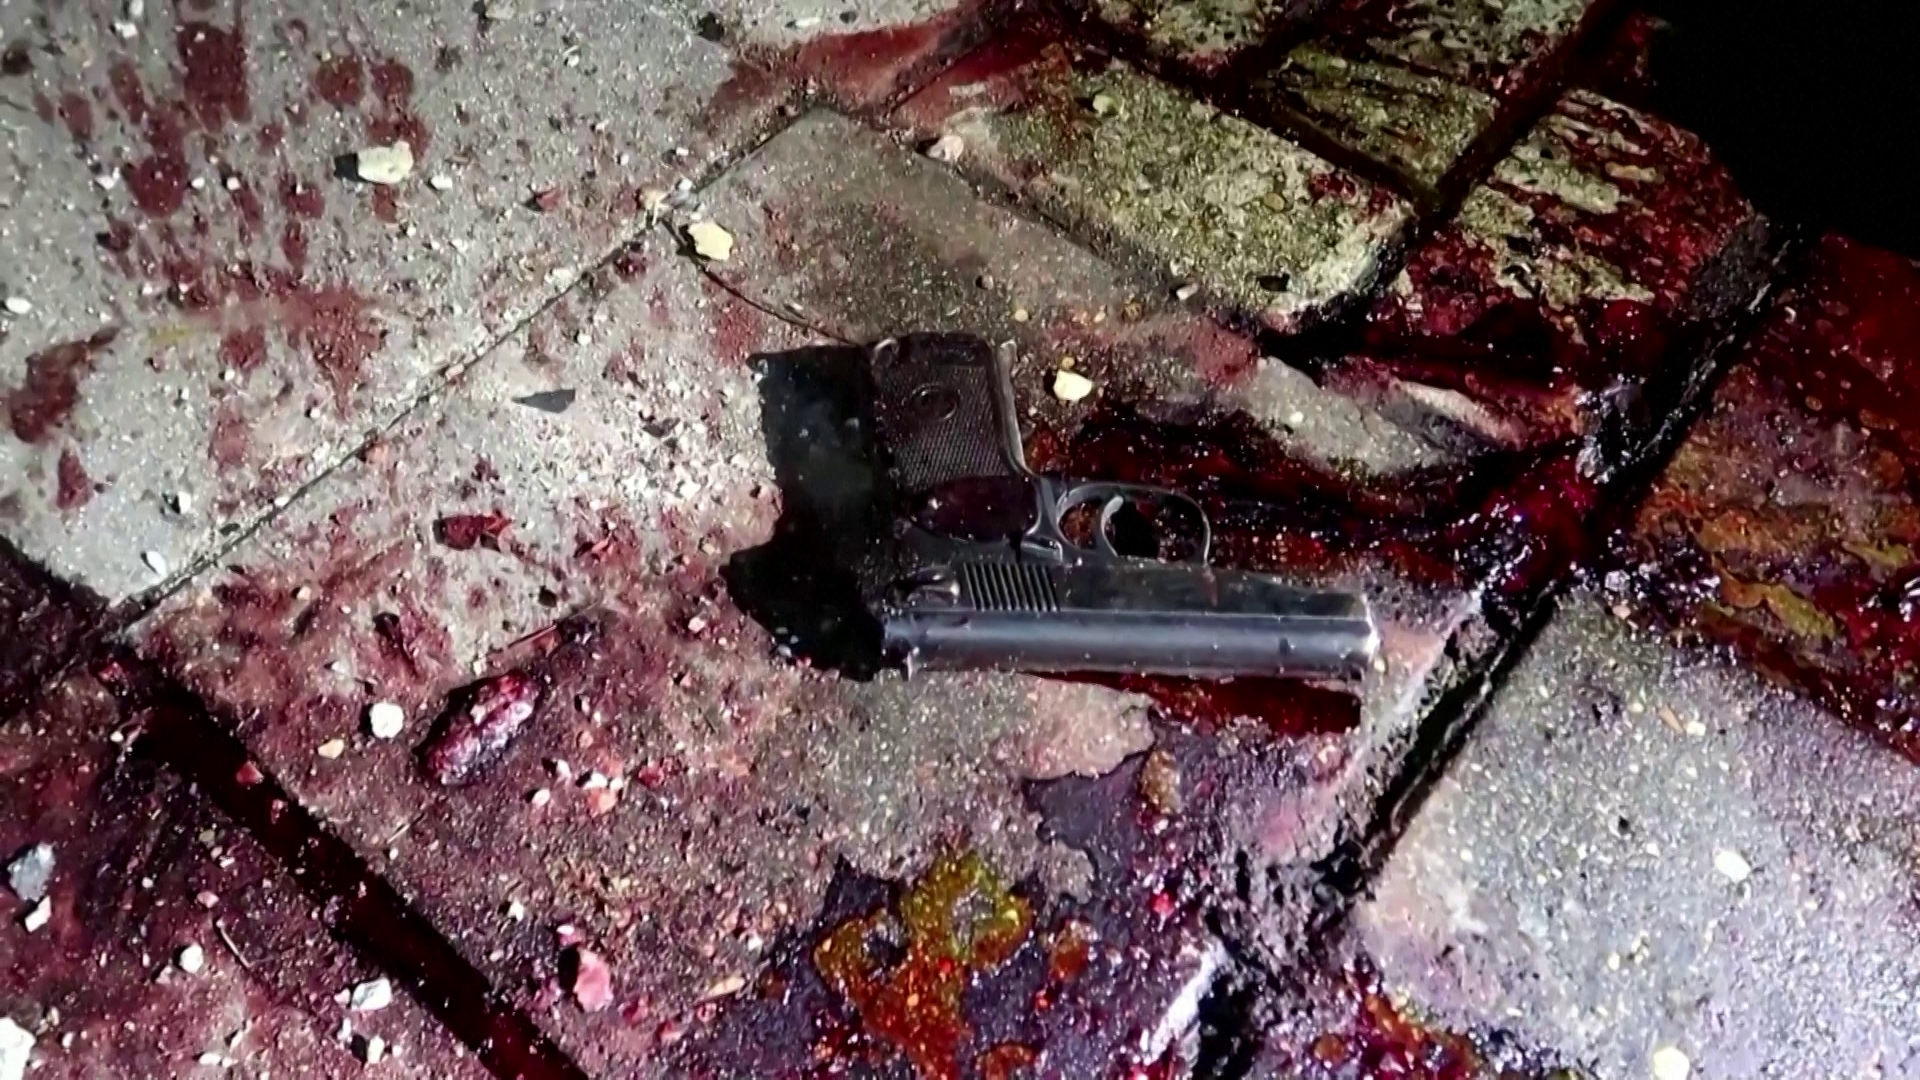 Churches & synagogues attacked by gunmen in Russias Dagestan | ISIL/ISIS [Video]